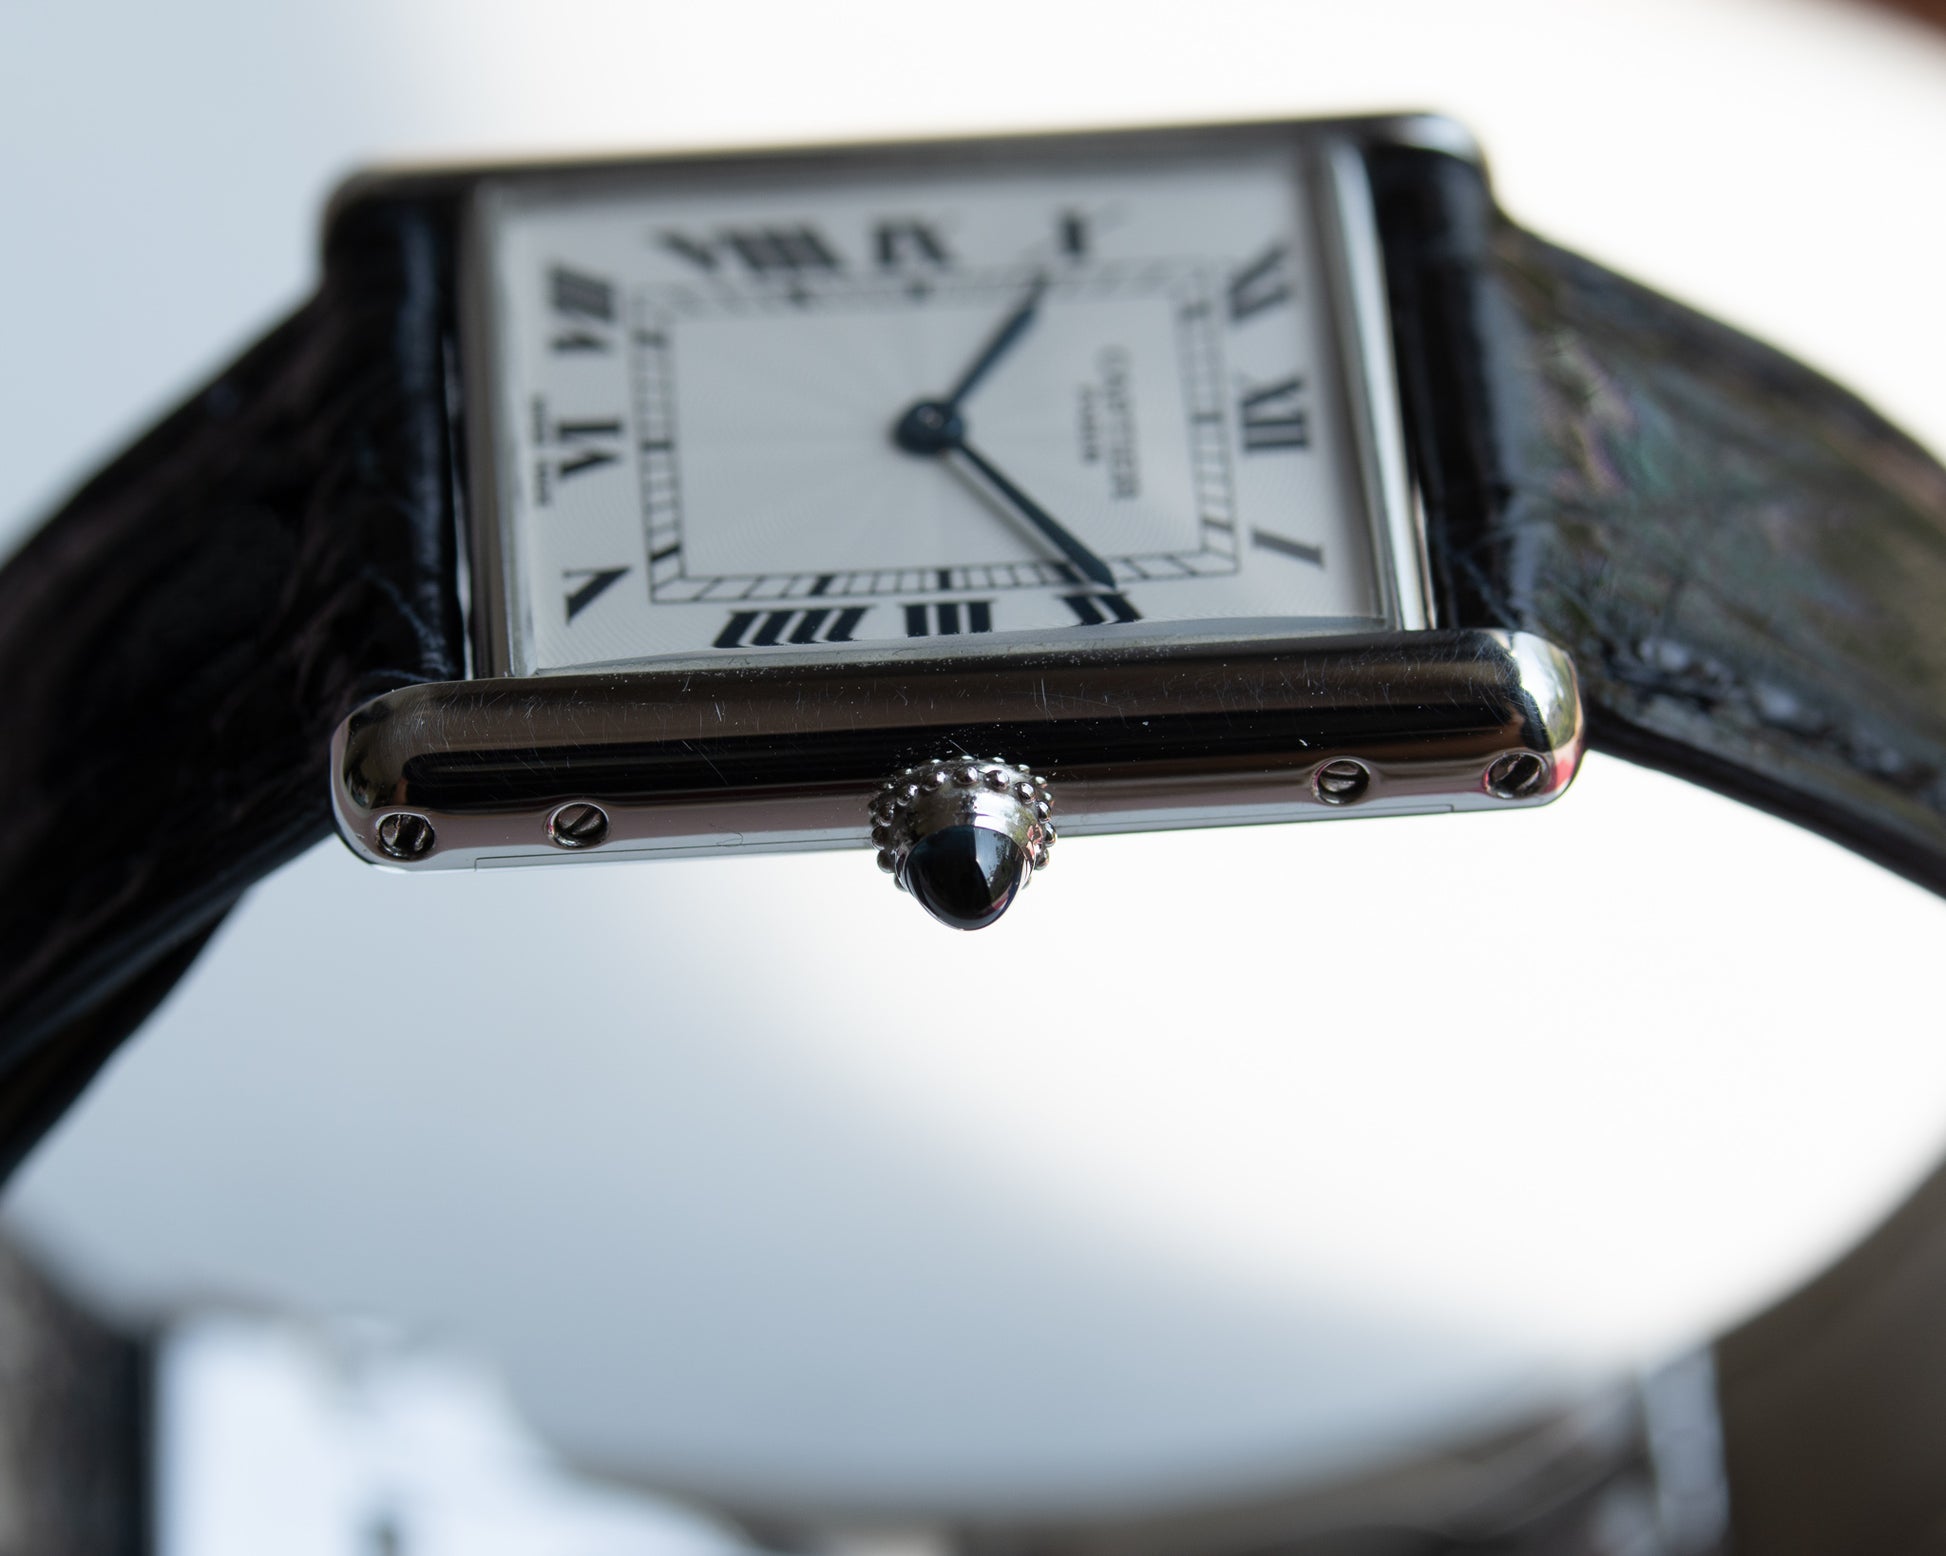 Cartier Tank Louis in platinum from the CPCP collection - full set –  Special Dial